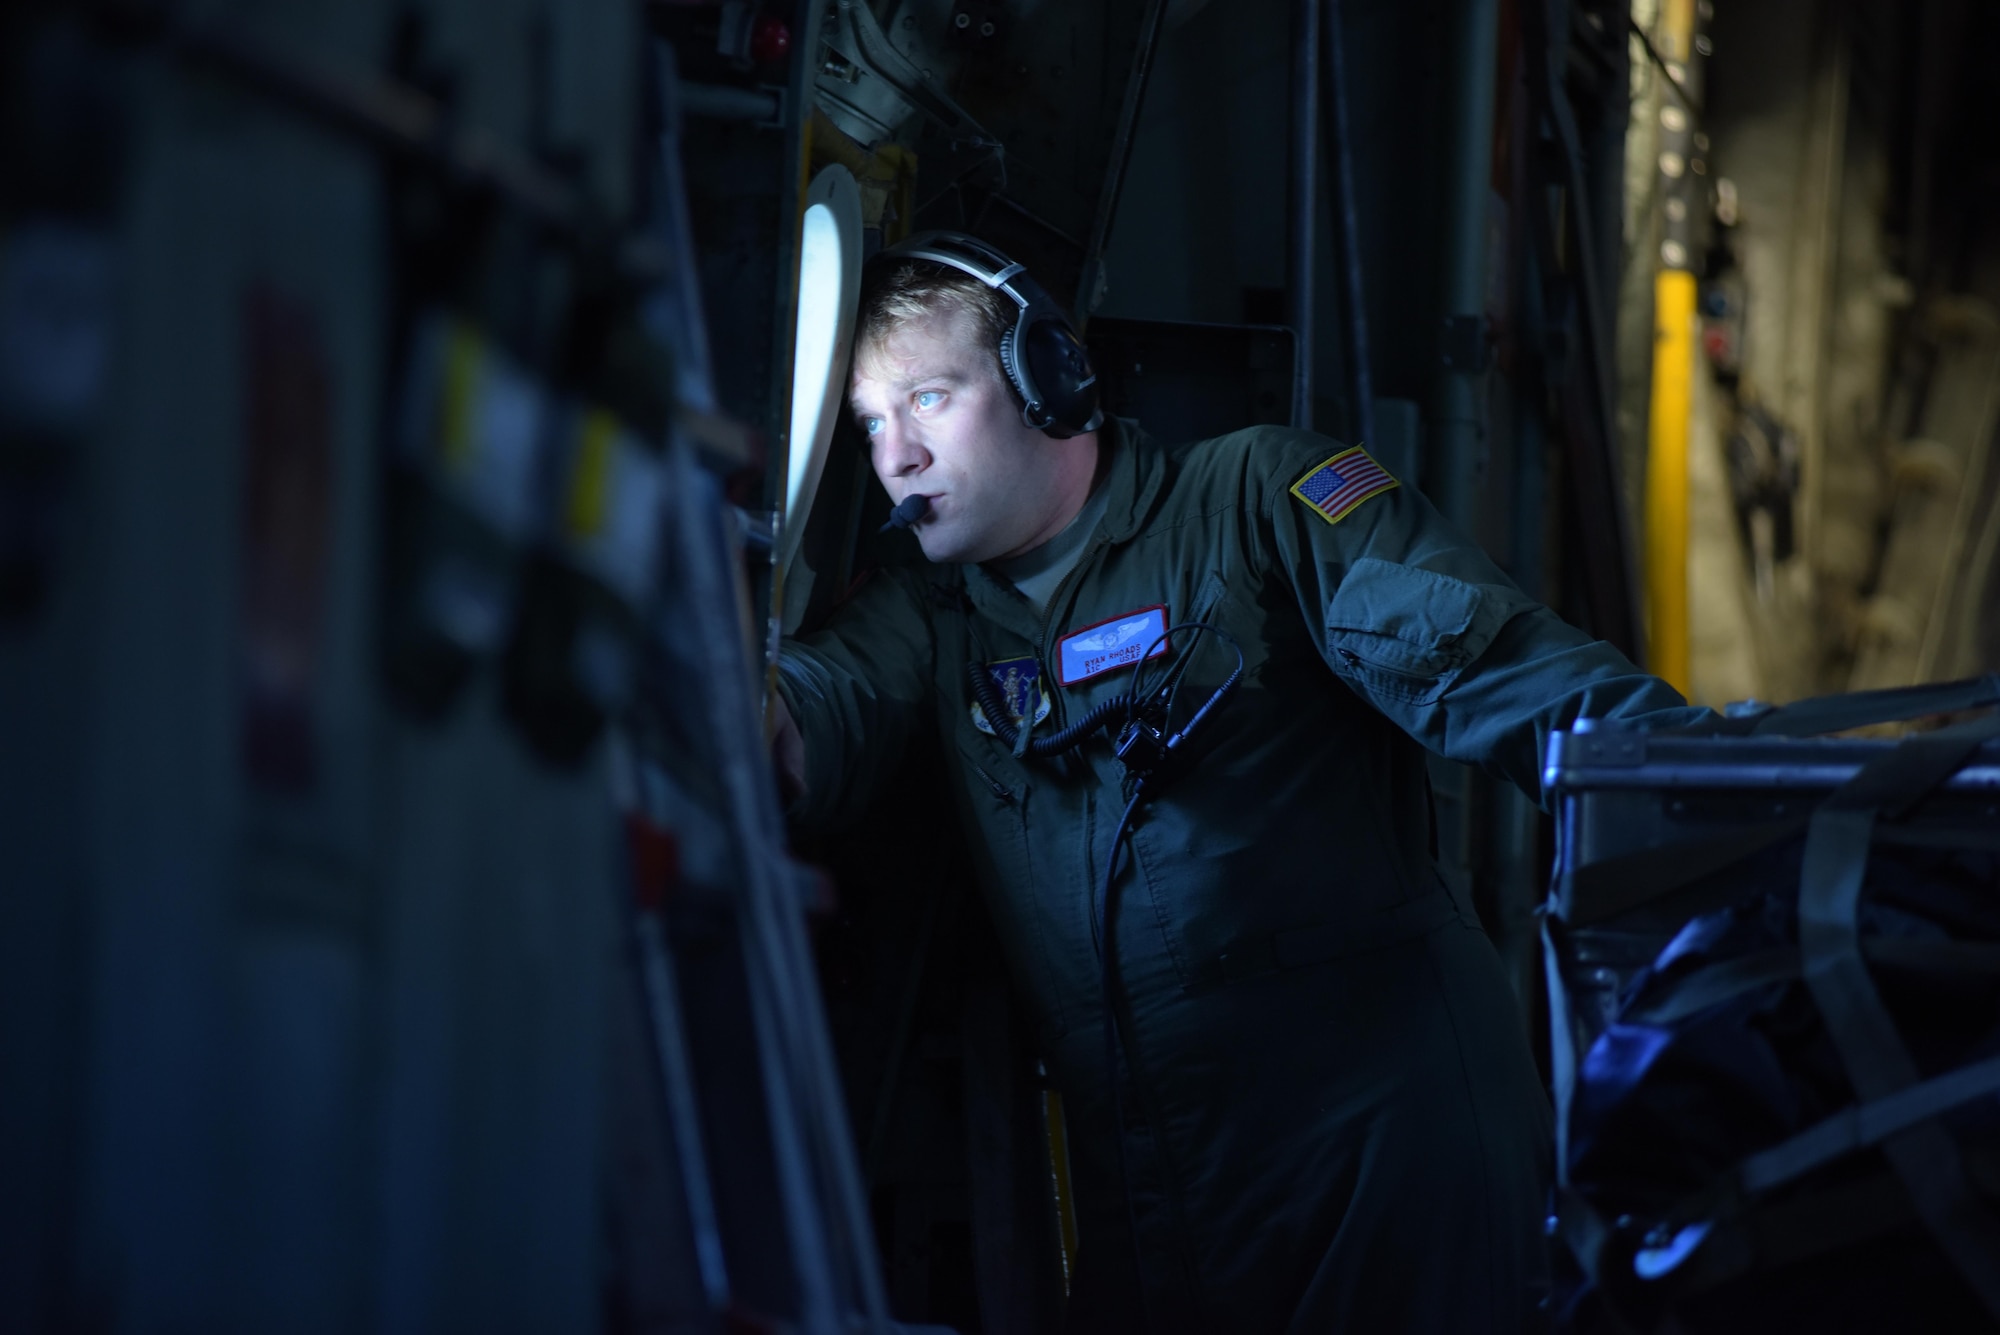 OVER GREENLAND - Airman 1st Class Ryan Rhoades, a student loadmaster with the 139th Airlift Squadron, on a flight to East GRIP (East Greenland Ice-core Project) from Kangerlussuaq, Greenland, on July 29, 2017. That was the 13th mission the 109th Airlift Wing made to East GRIP this season to transport cargo and scientists.  (U.S. Air National Guard photo by Senior Airman Jamie Spaulding/Released)